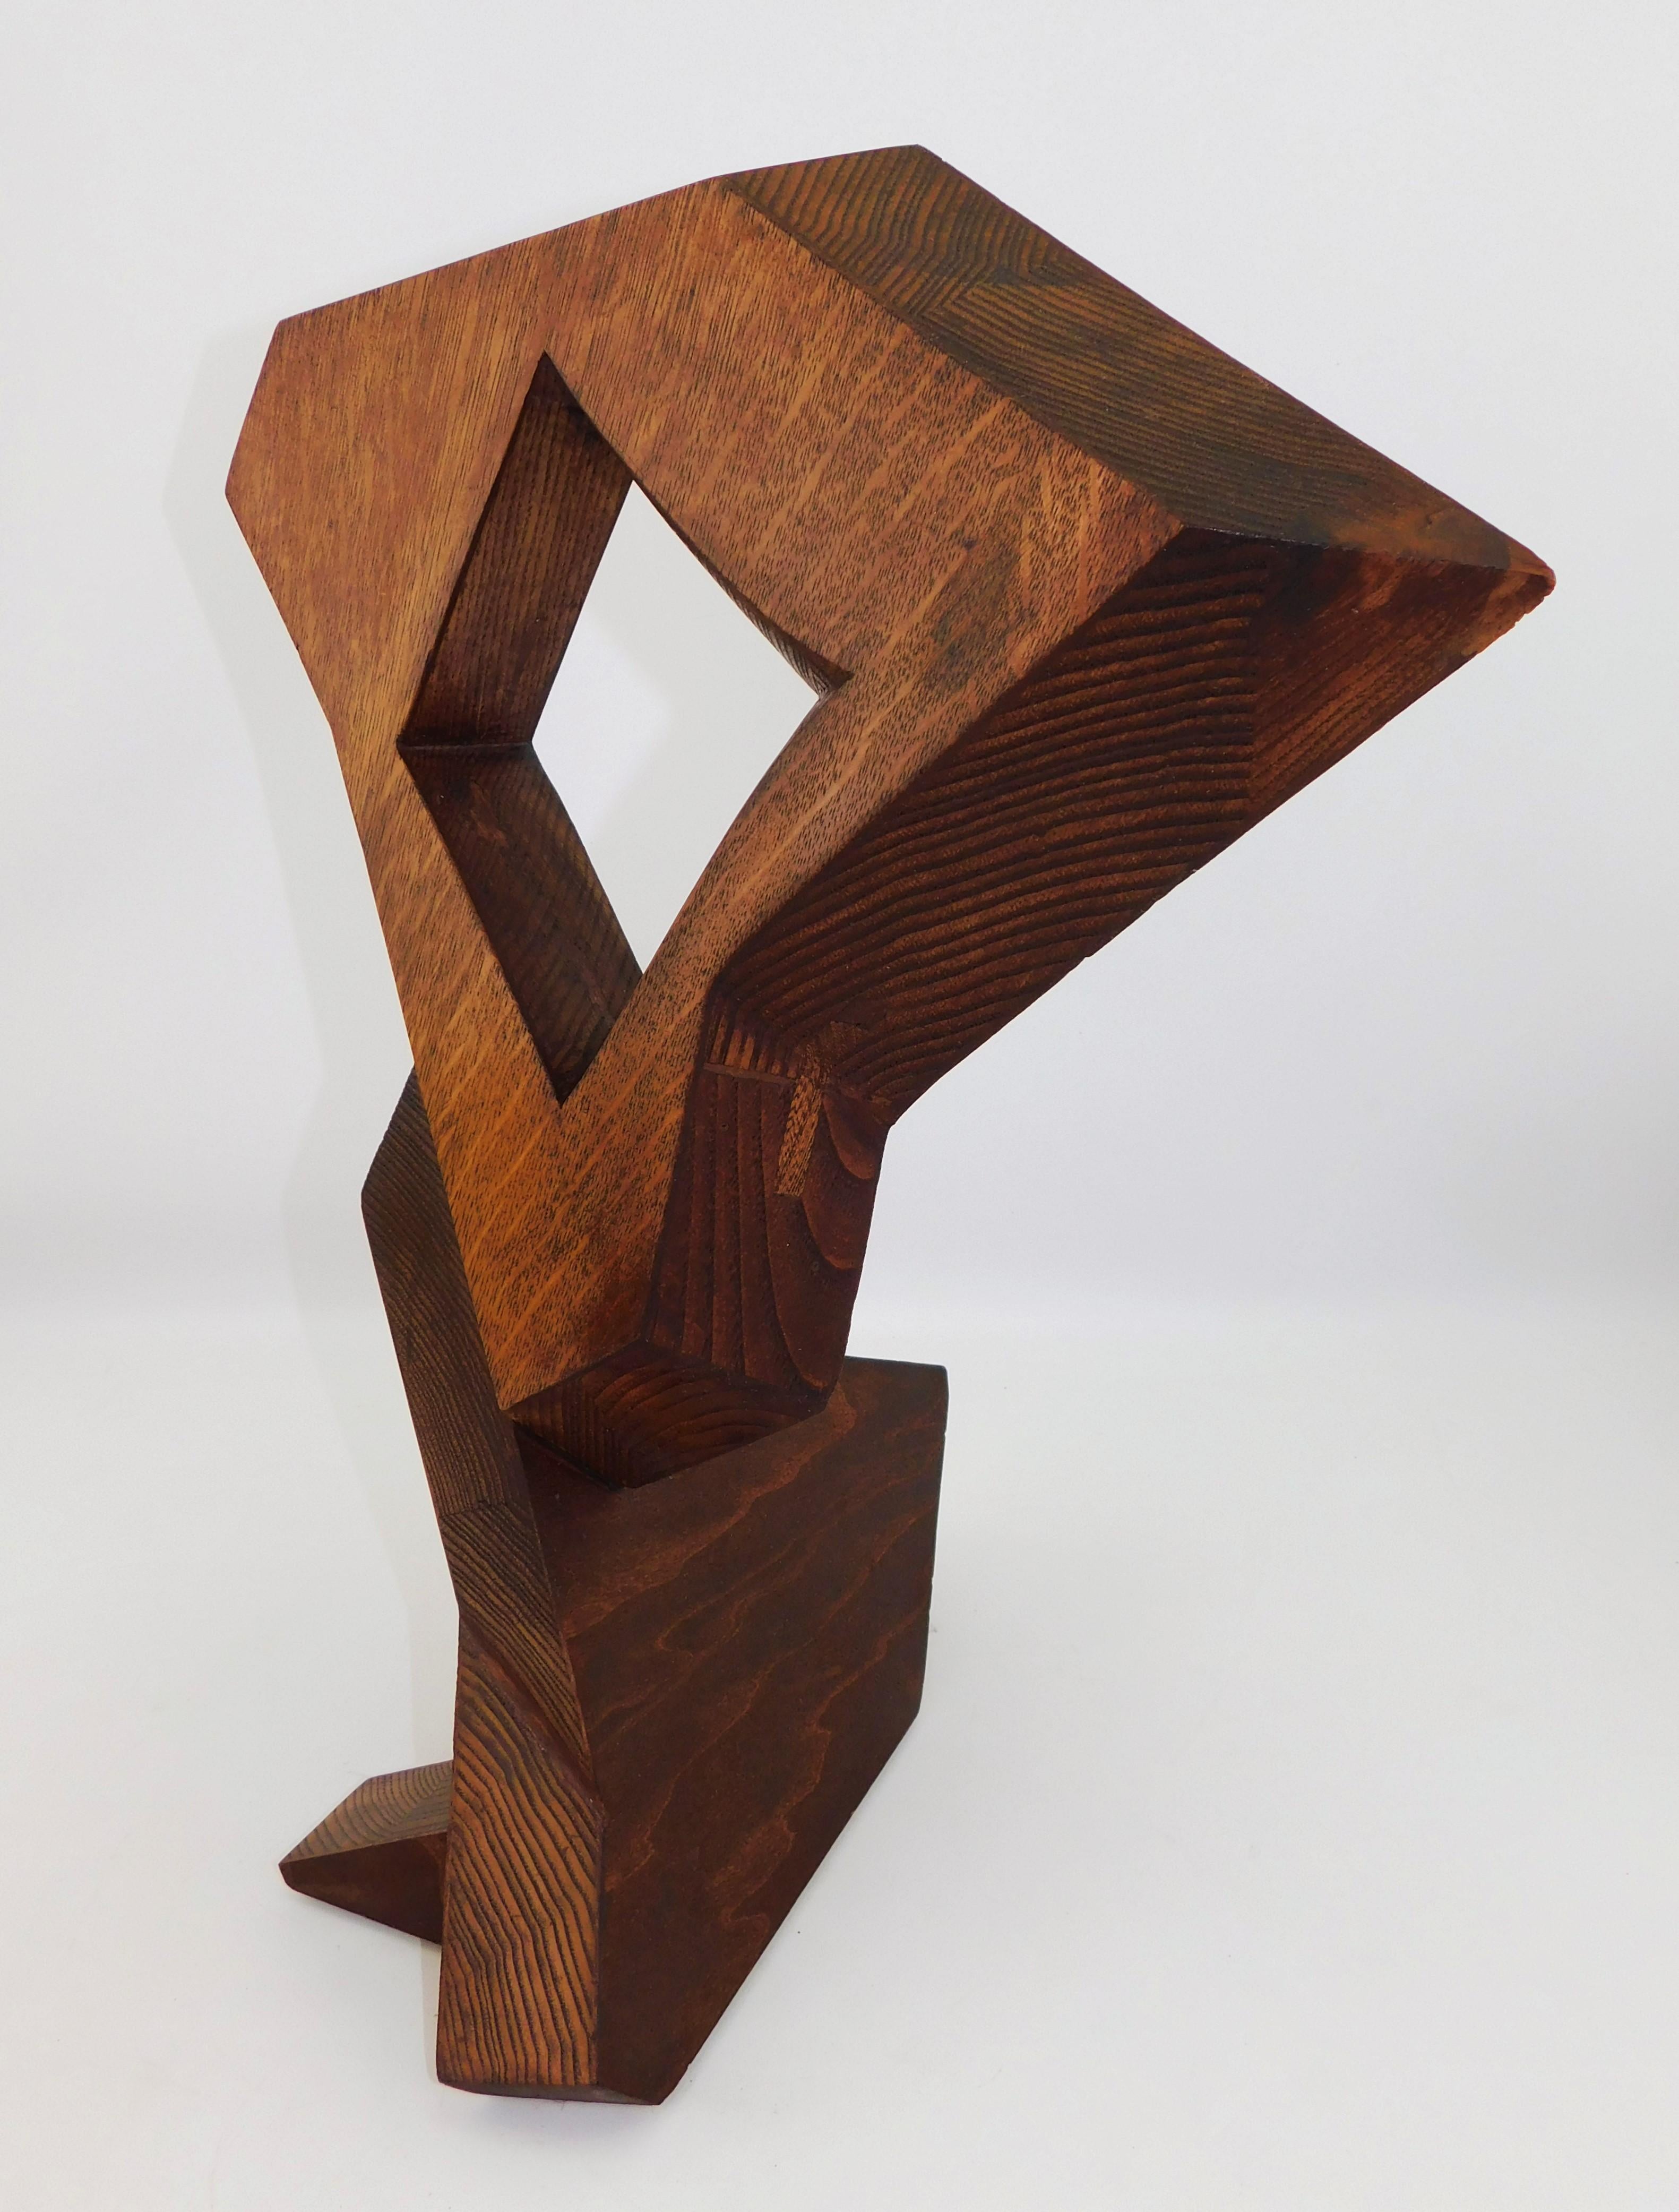 Canadian Signed Modern Abstract Constructivist Styled Wooden Oak Sculpture Czeslaw Budny For Sale